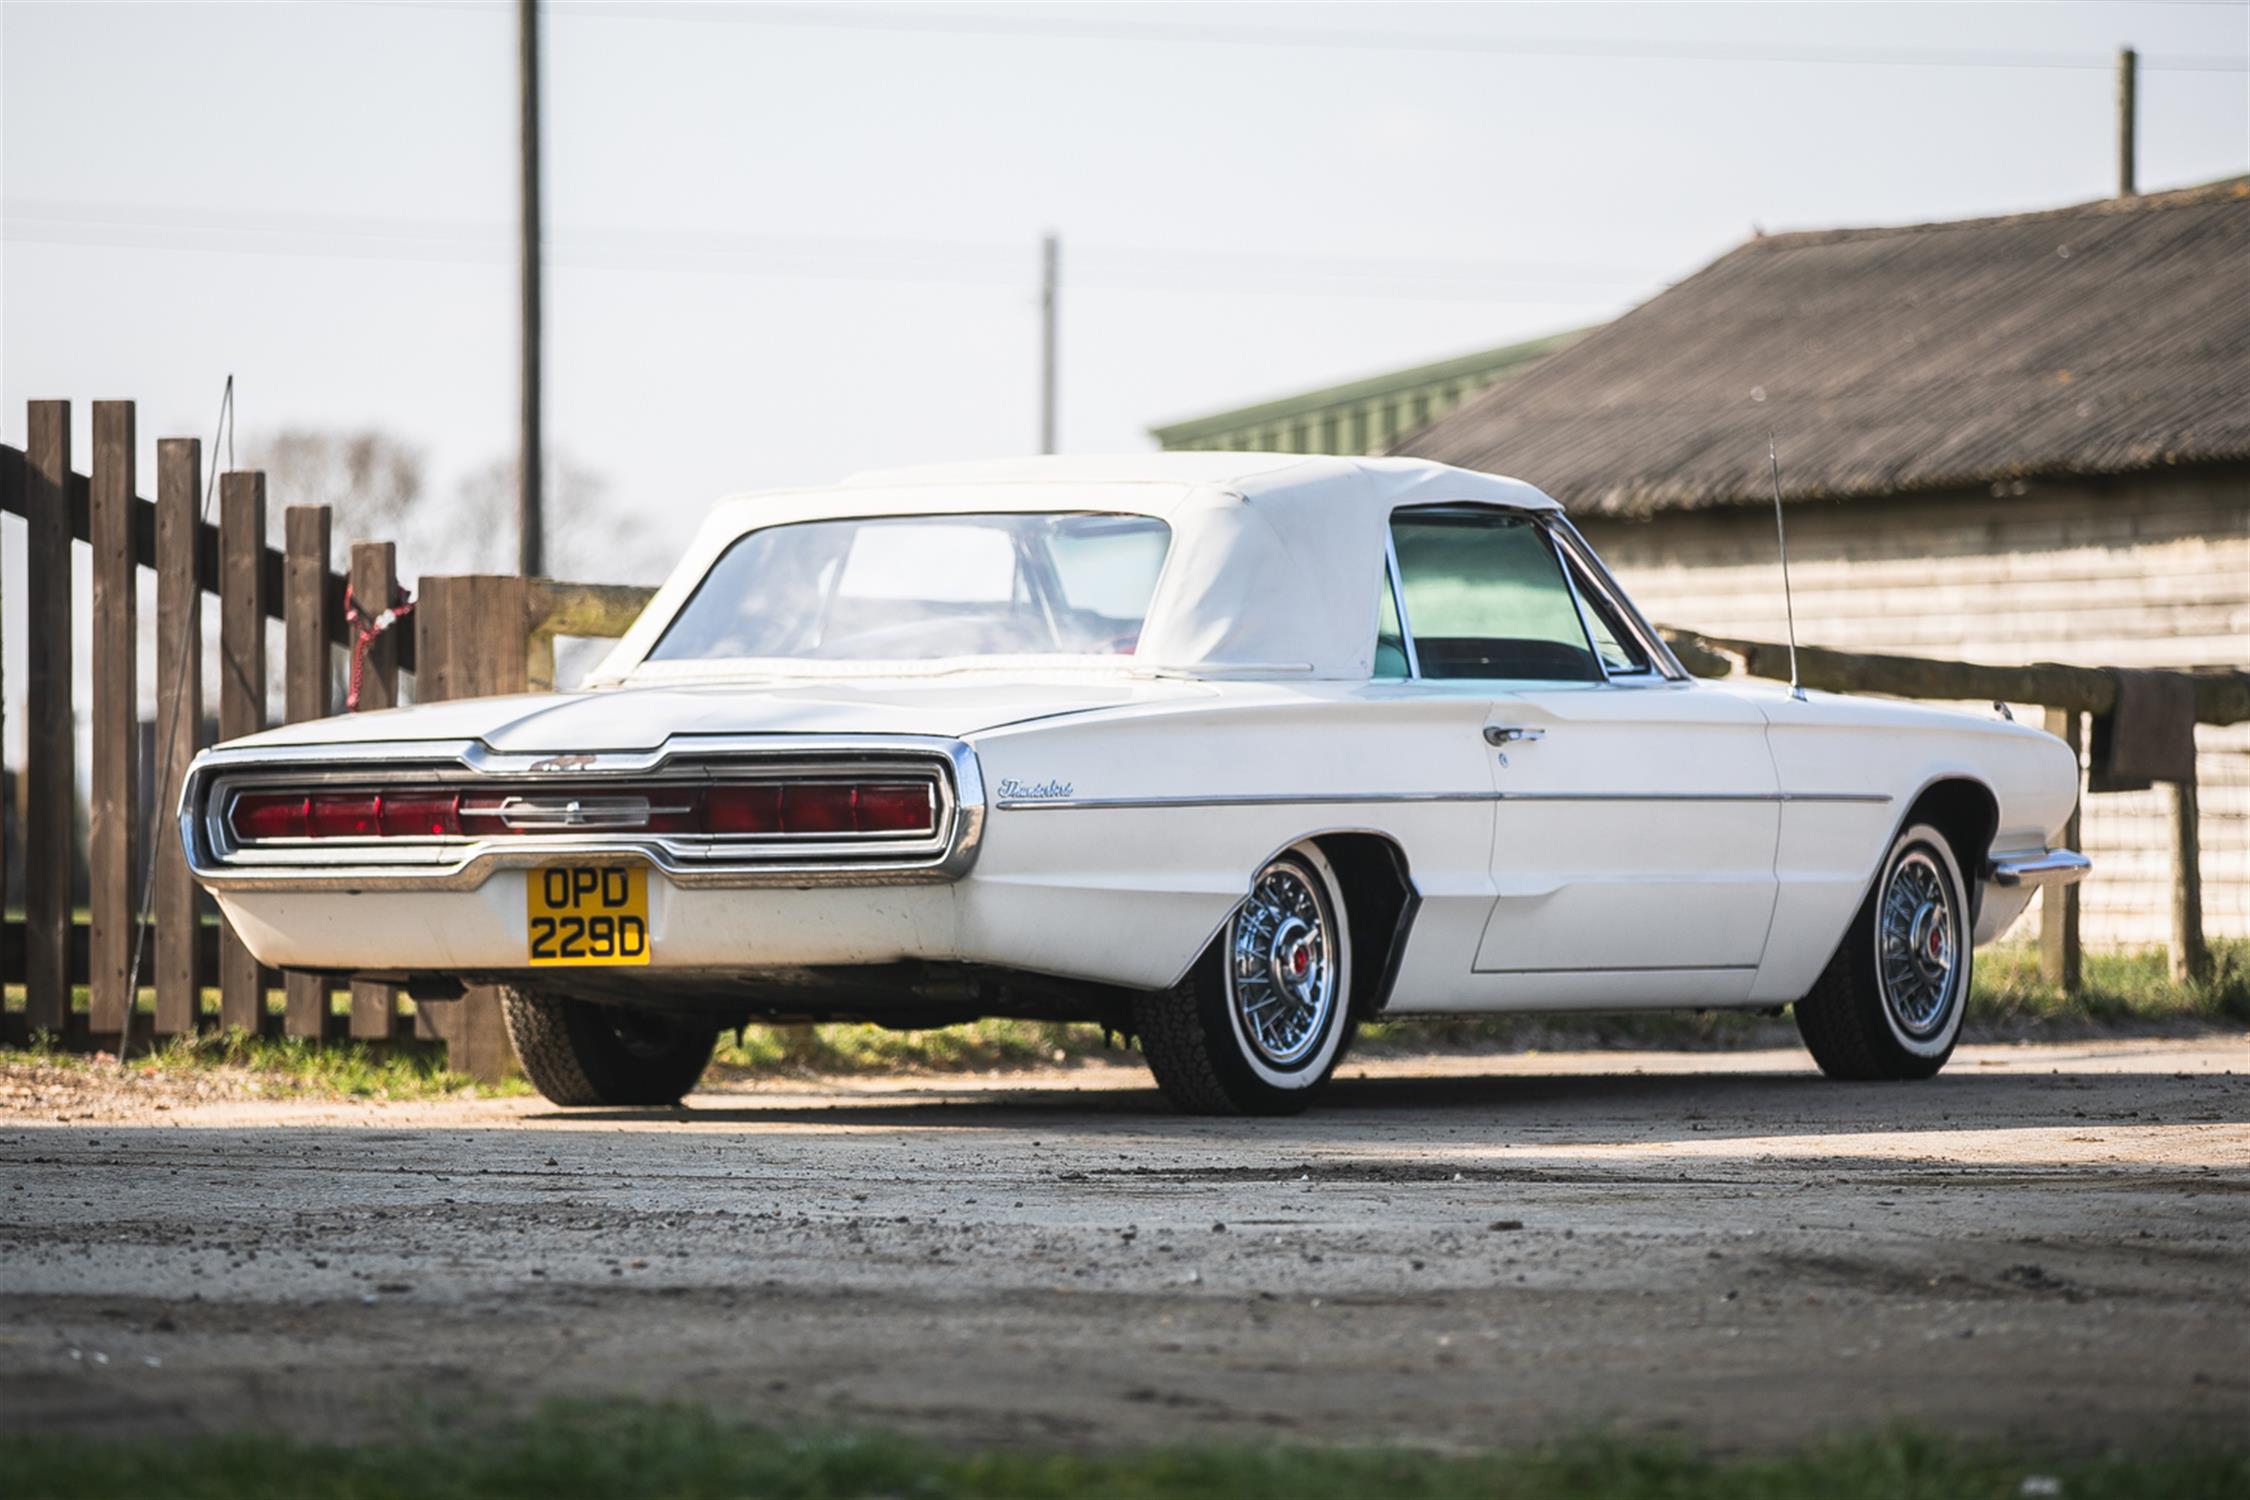 1966 Ford Thunderbird Convertible - Image 4 of 10